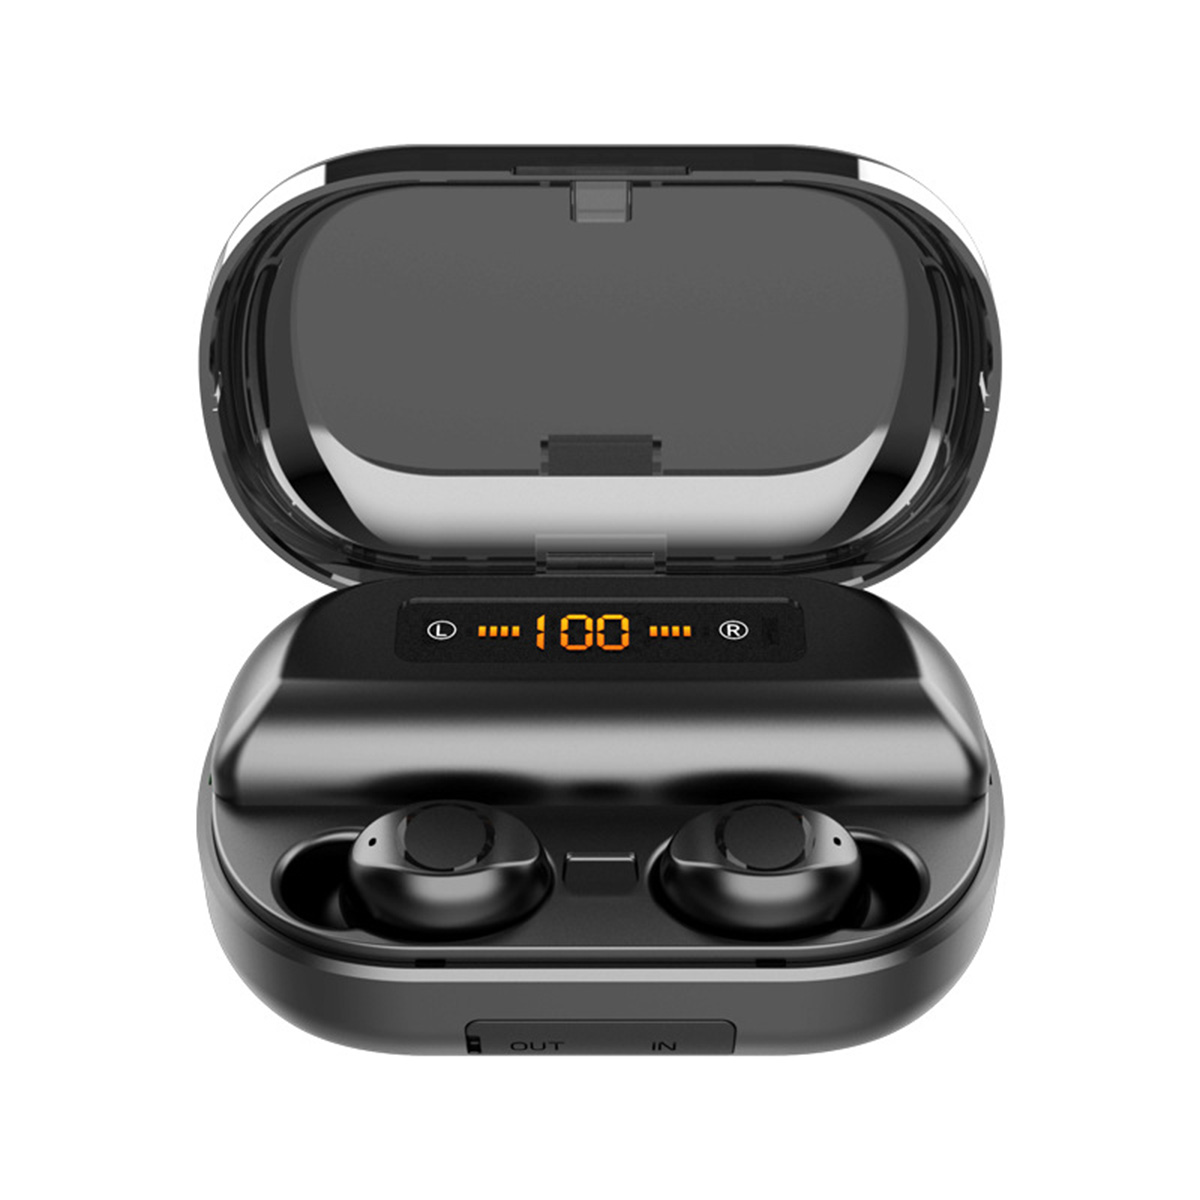 

V12 bluetooth 5.0 In-ear TWS Earphone Stereo Wireless Dual Earbuds+Charging Case Digital Display With 4000mAh Power Bank